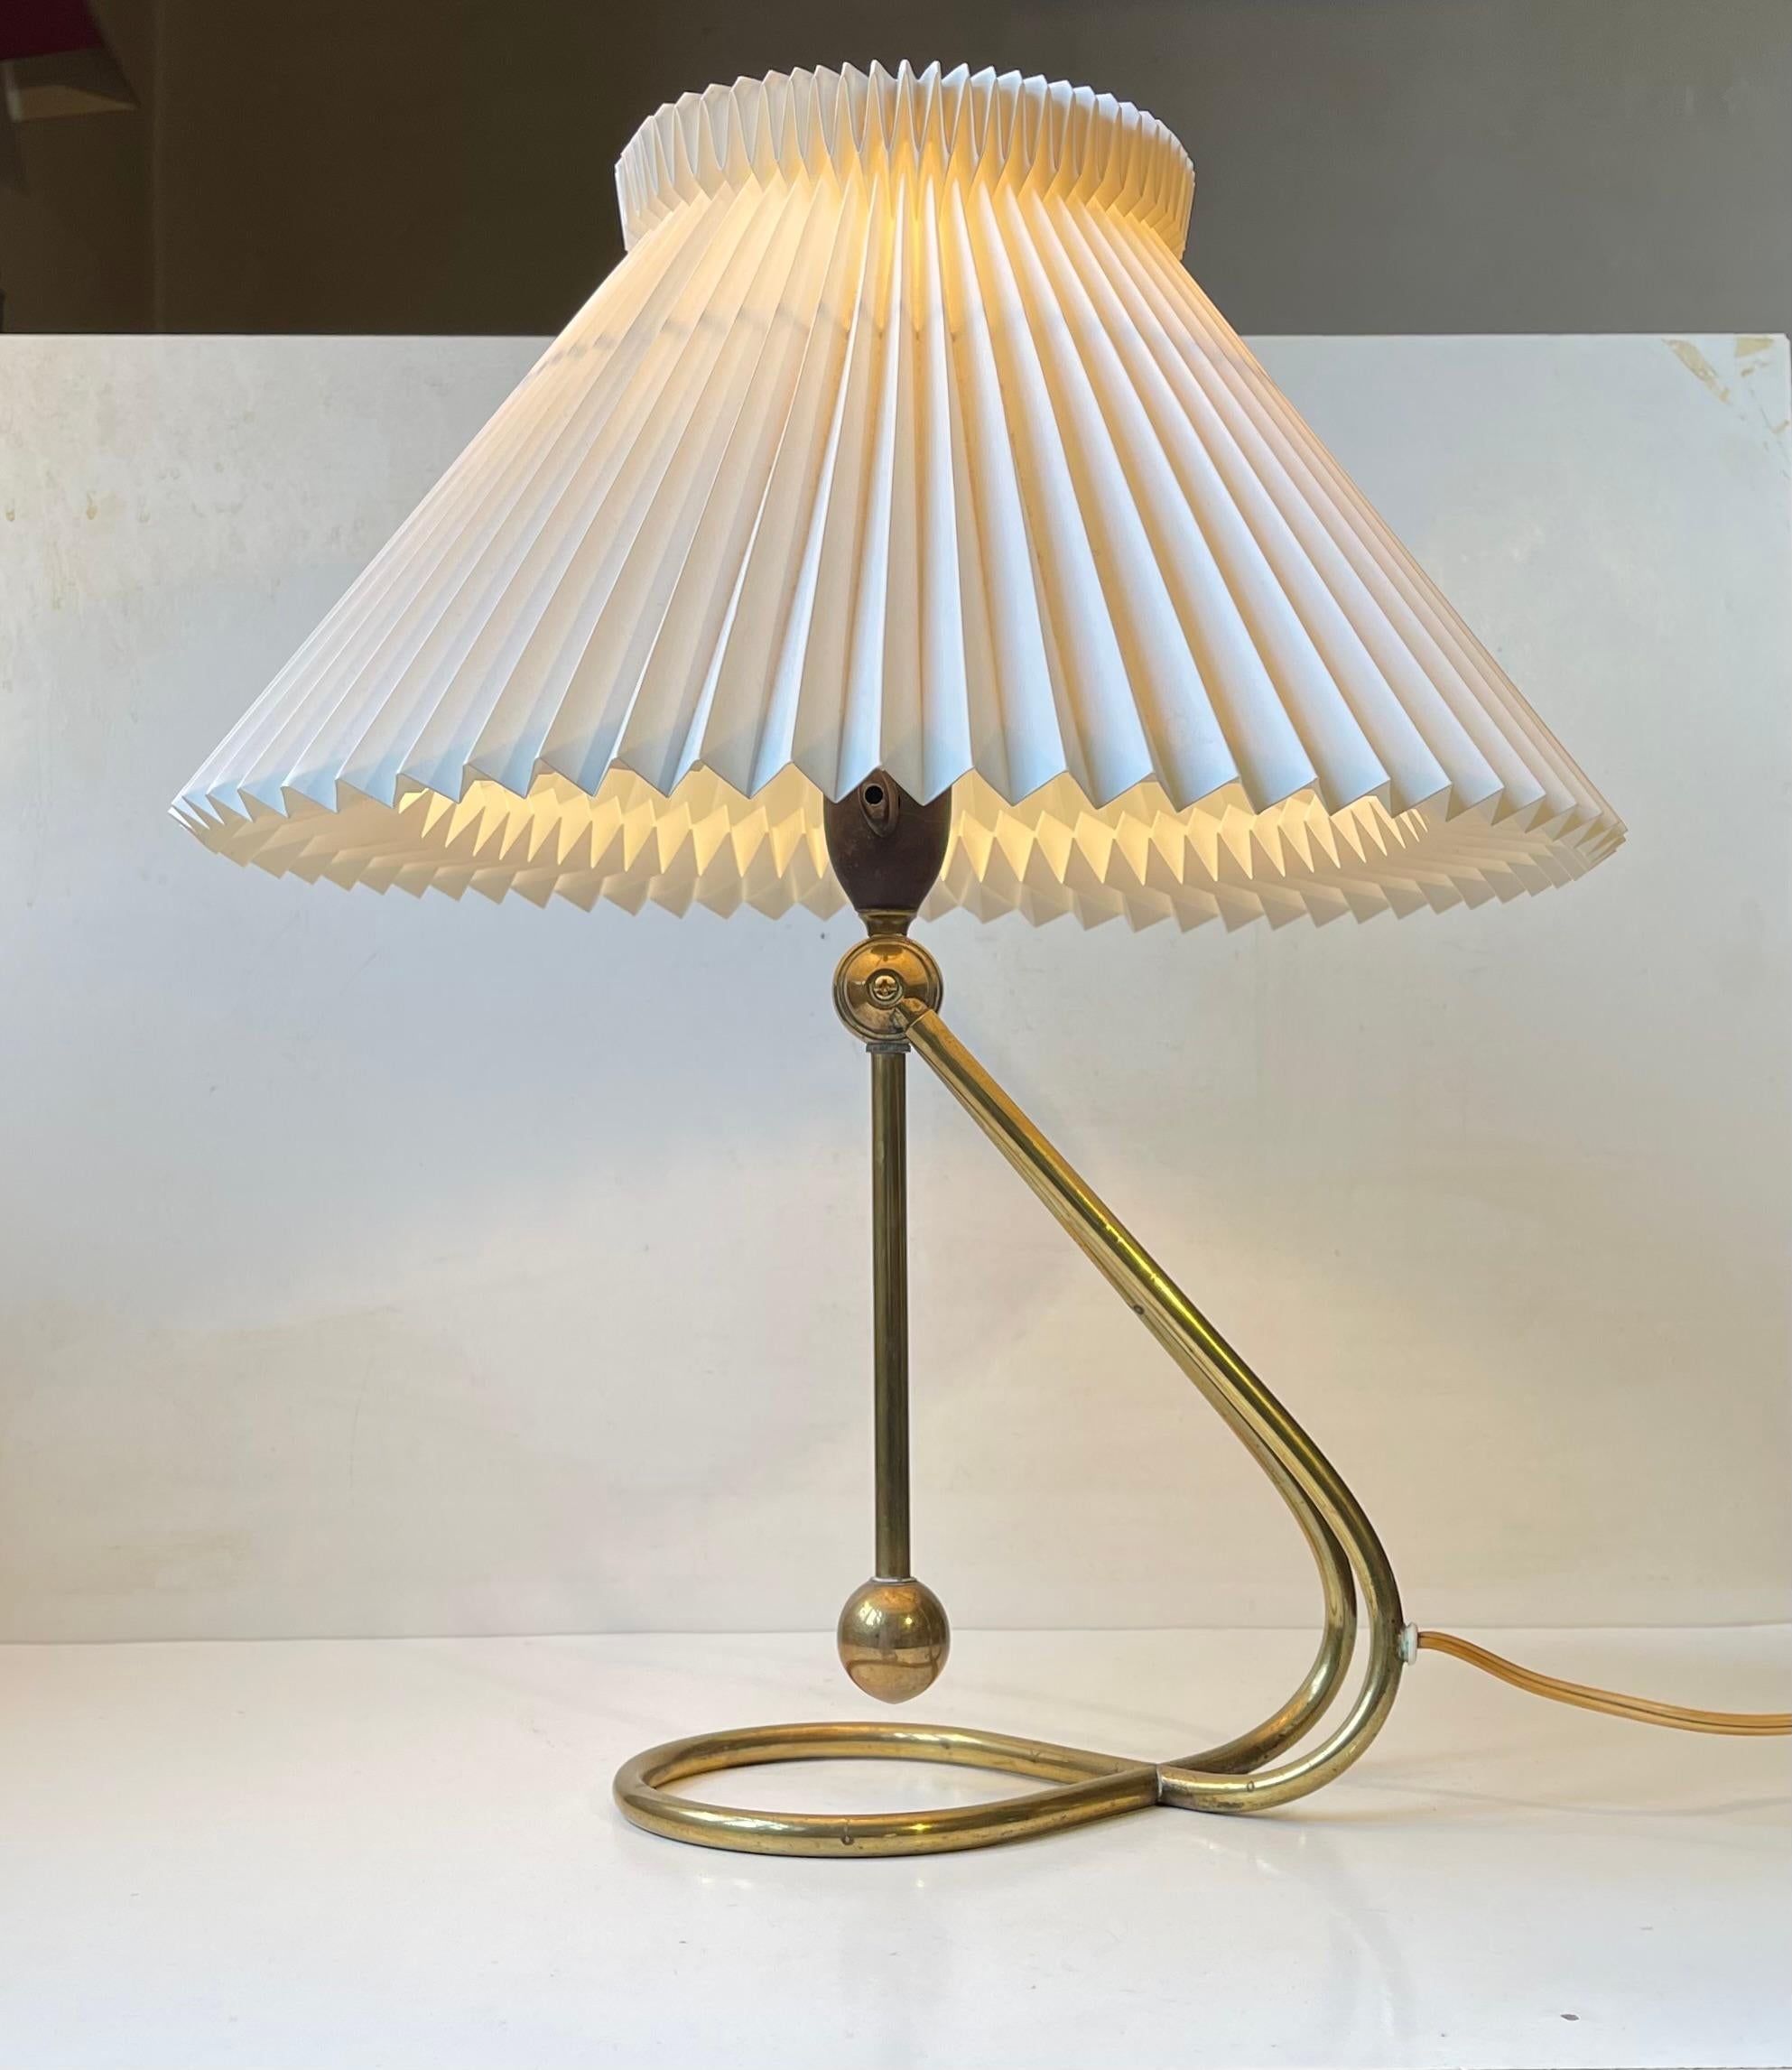 Exceptionally rare table or wall lamp with an adjustable base in solid tubular brass featuring its original bakelite socket and the characteristic fluted white Le Klint shade. This example dates from the 1950s and it has an updated/more recent